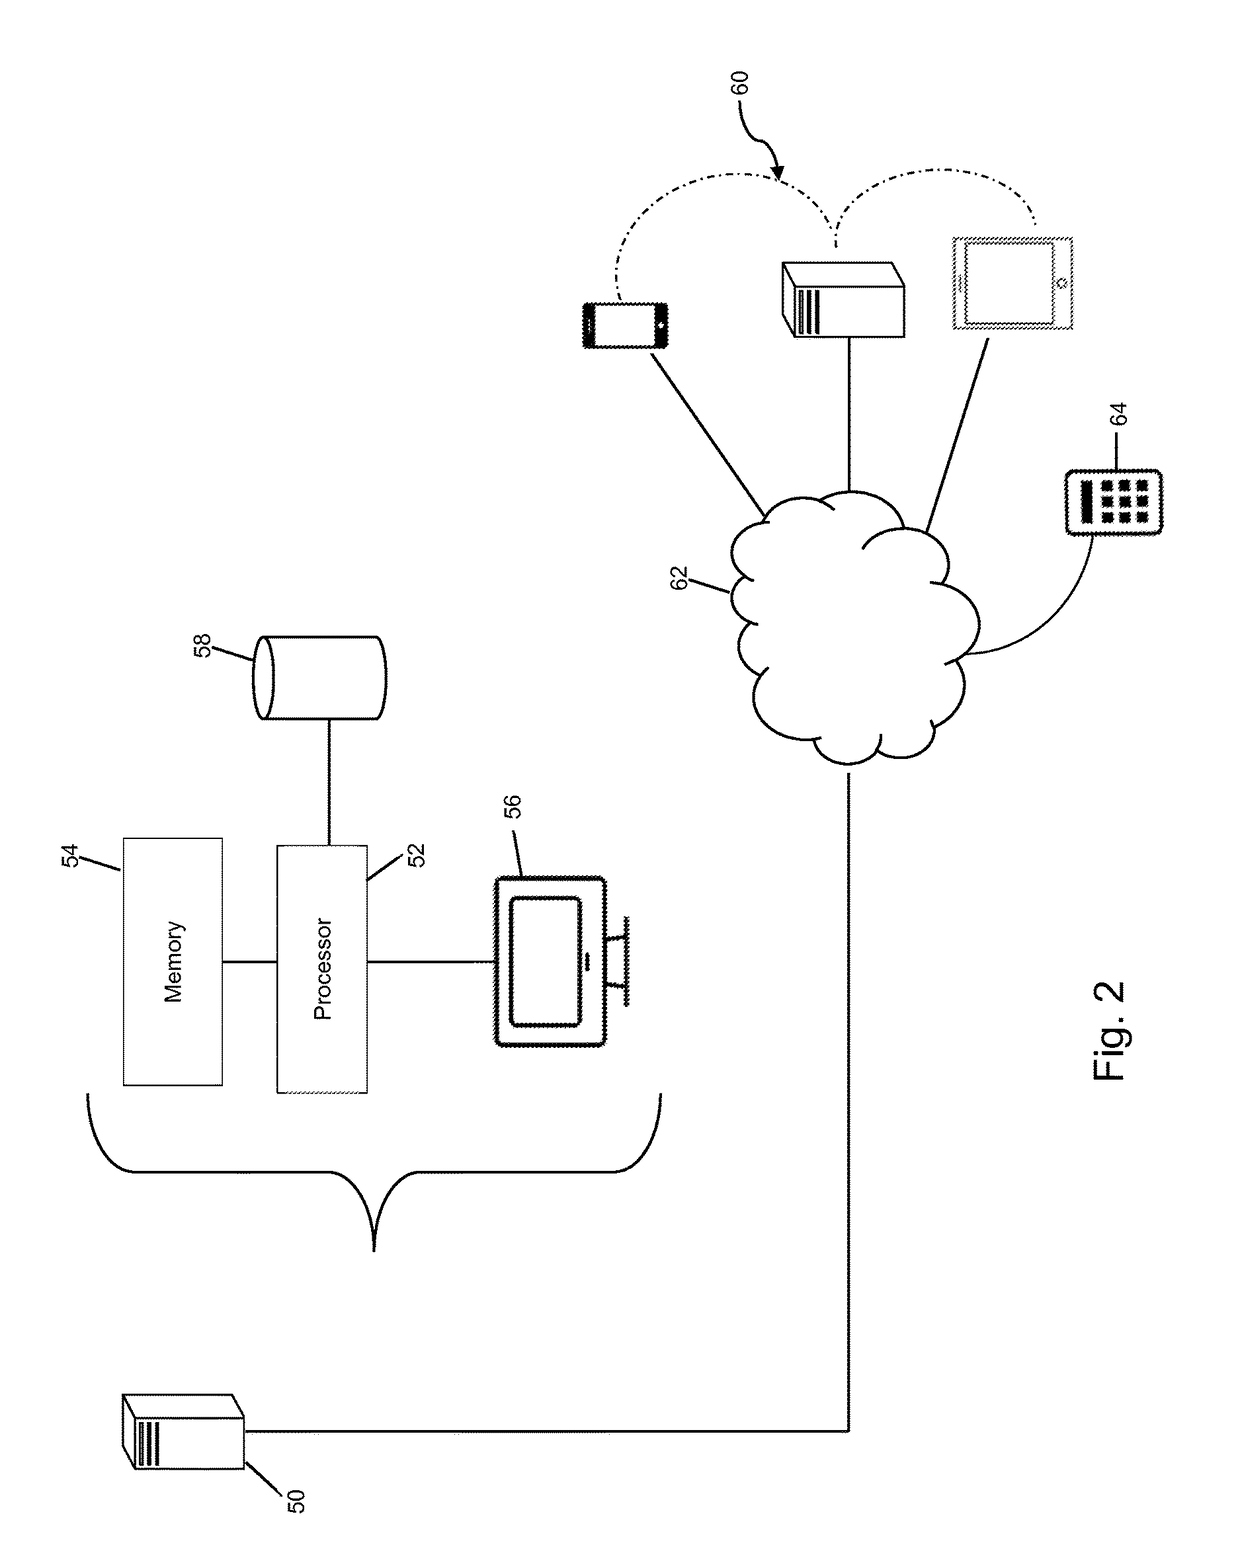 Computerized composite risk and benefits apparatus and method